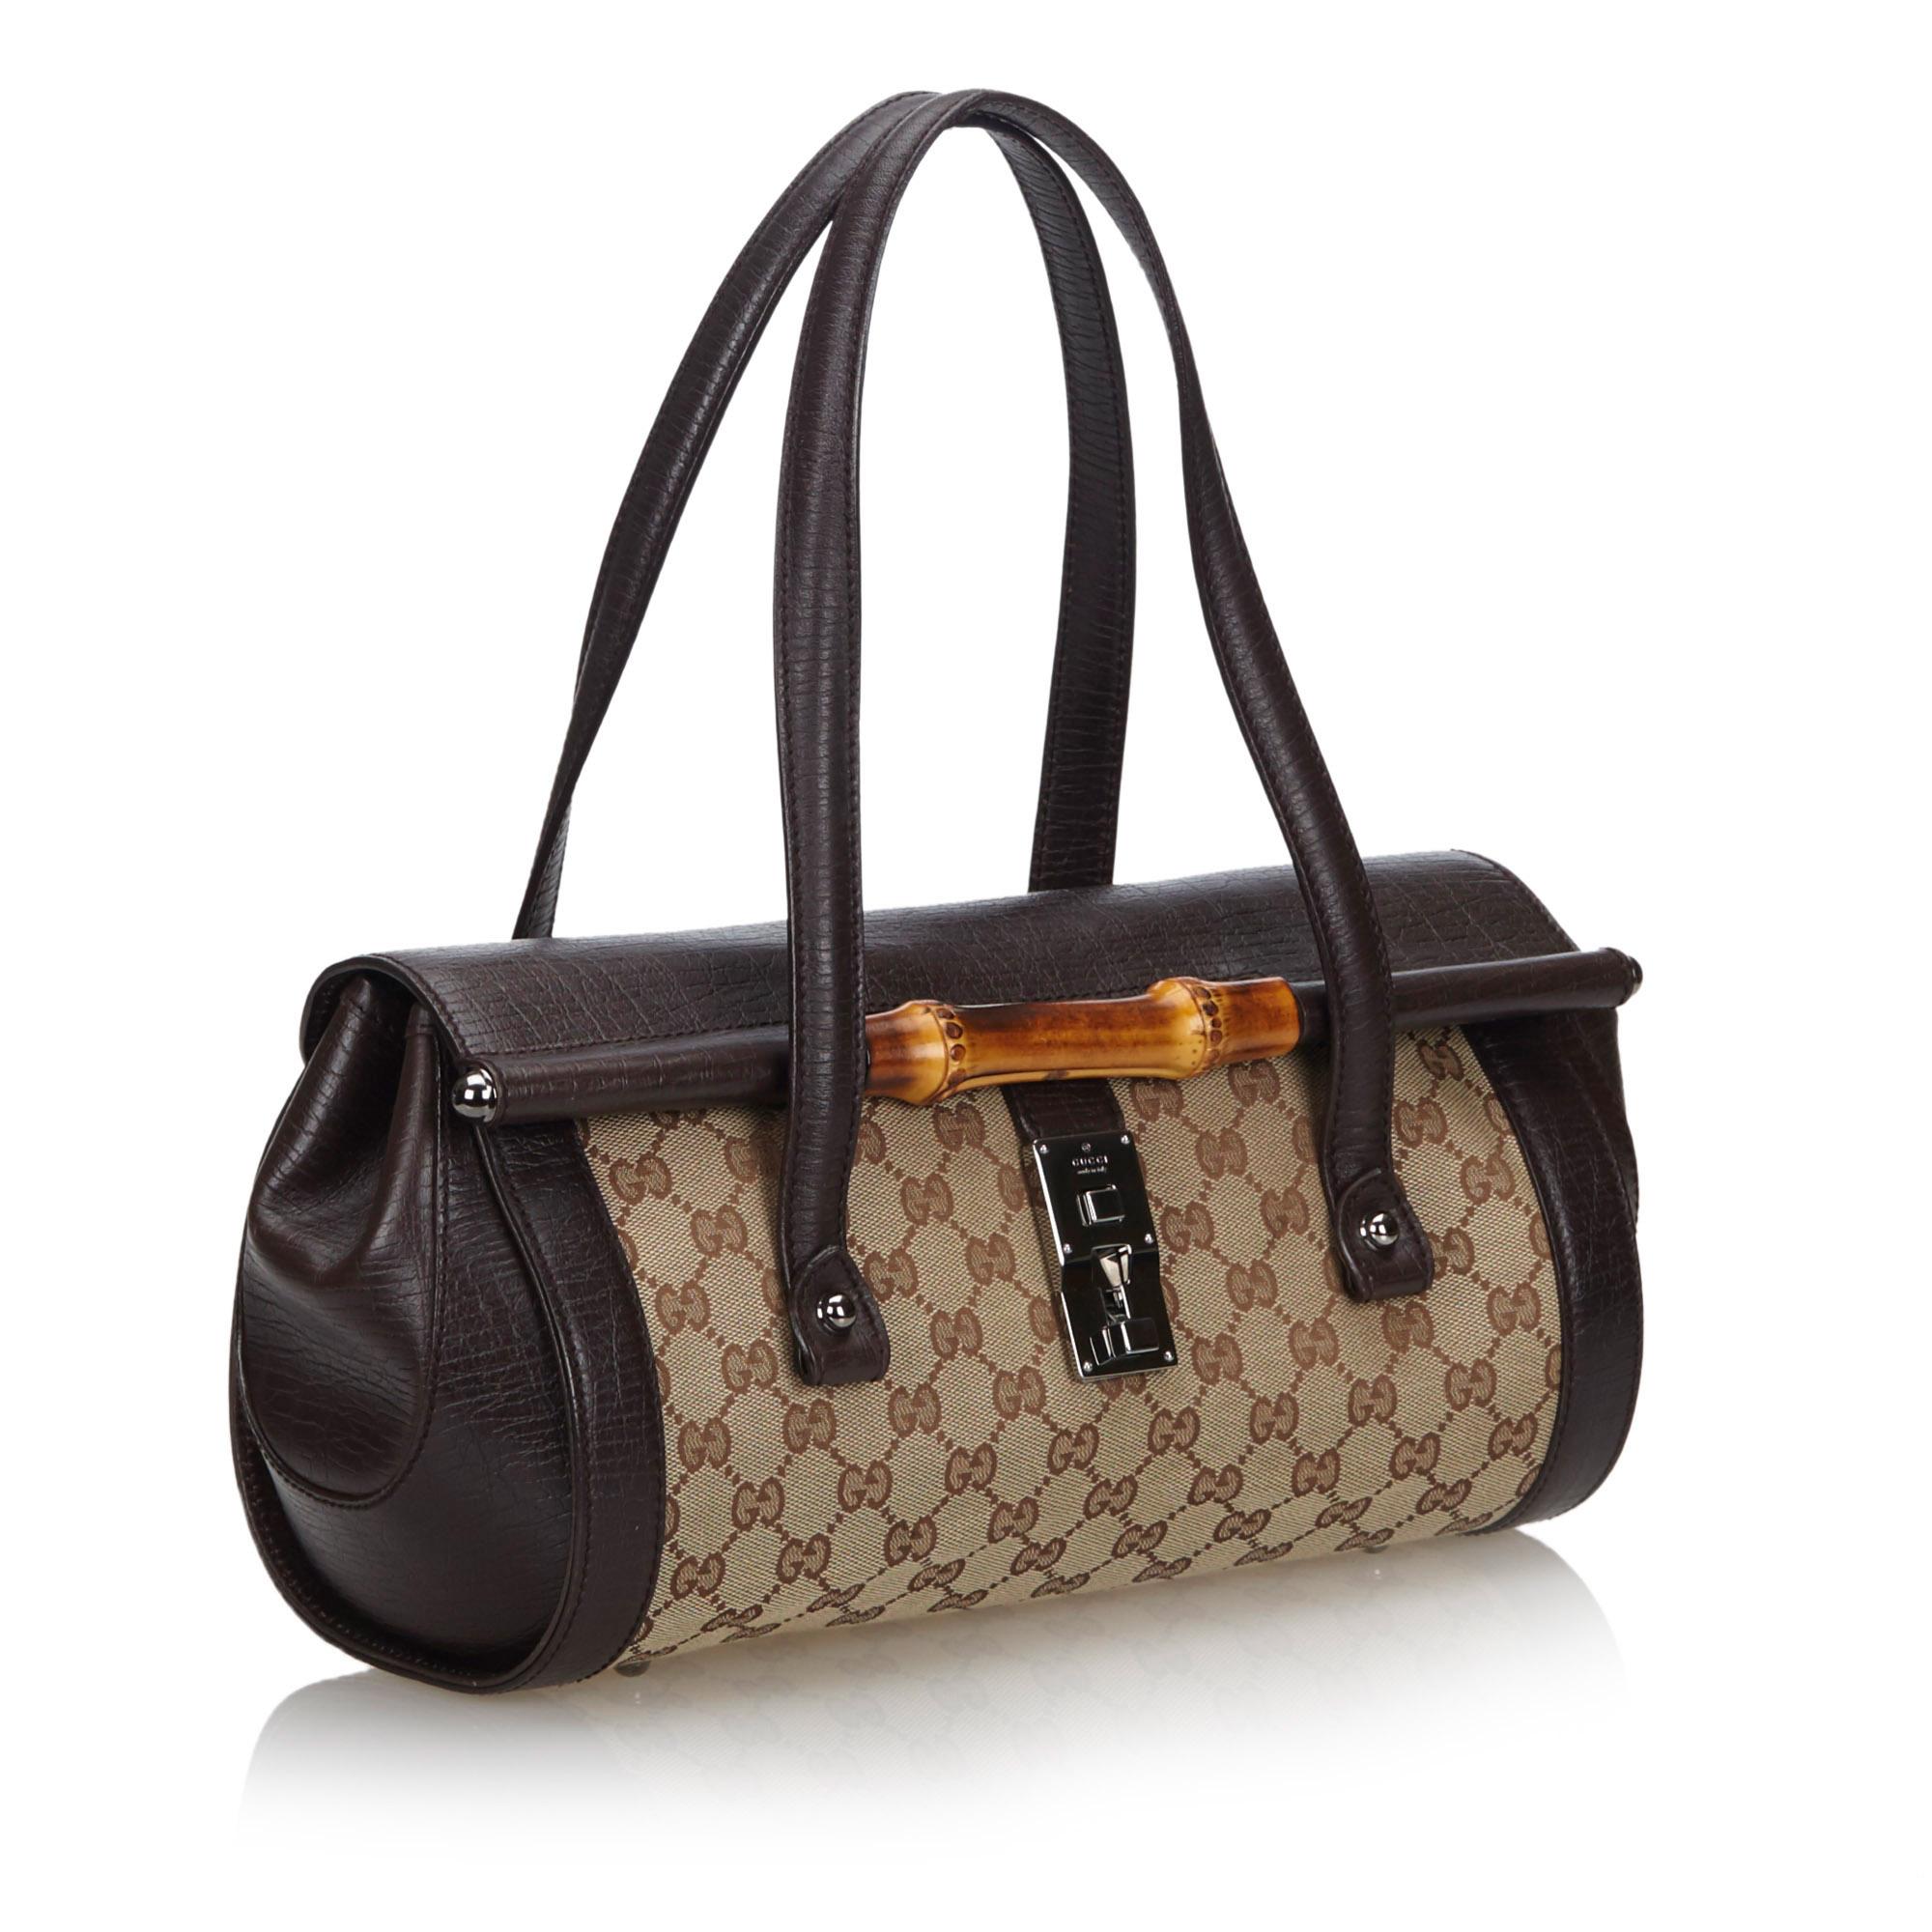 The Bamboo Bullet shoulder bag features a canvas body with leather trim, flat leather handles, a front flap with push lock closure, and an interior zip pocket. It carries as AB condition rating.

Inclusions: 
This item does not come with